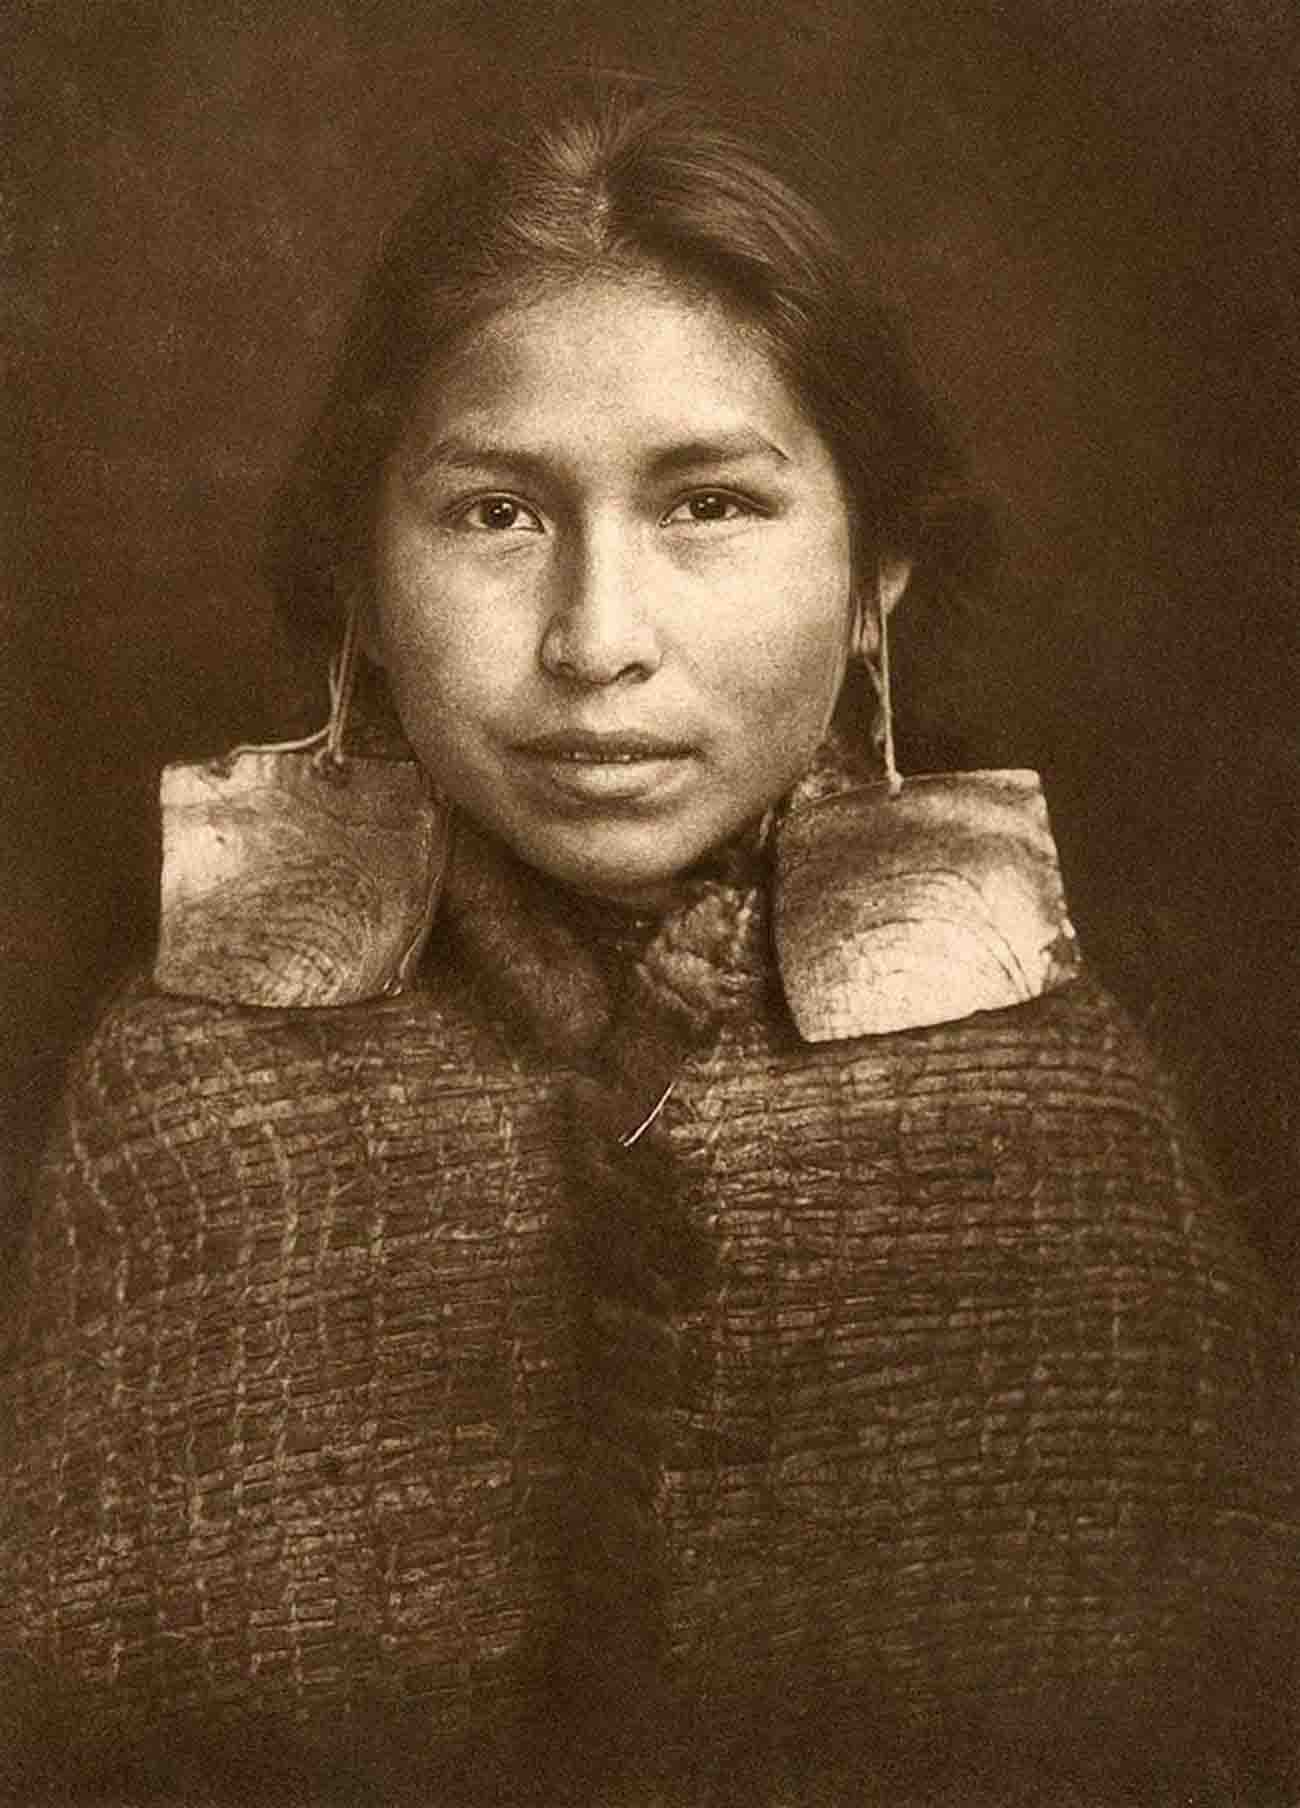 Dzawa̱da̱ʼenux̱w girl, Margaret Frank (née Wilson) wearing abalone shell earrings, a sign of nobility and worn only by members of this class.